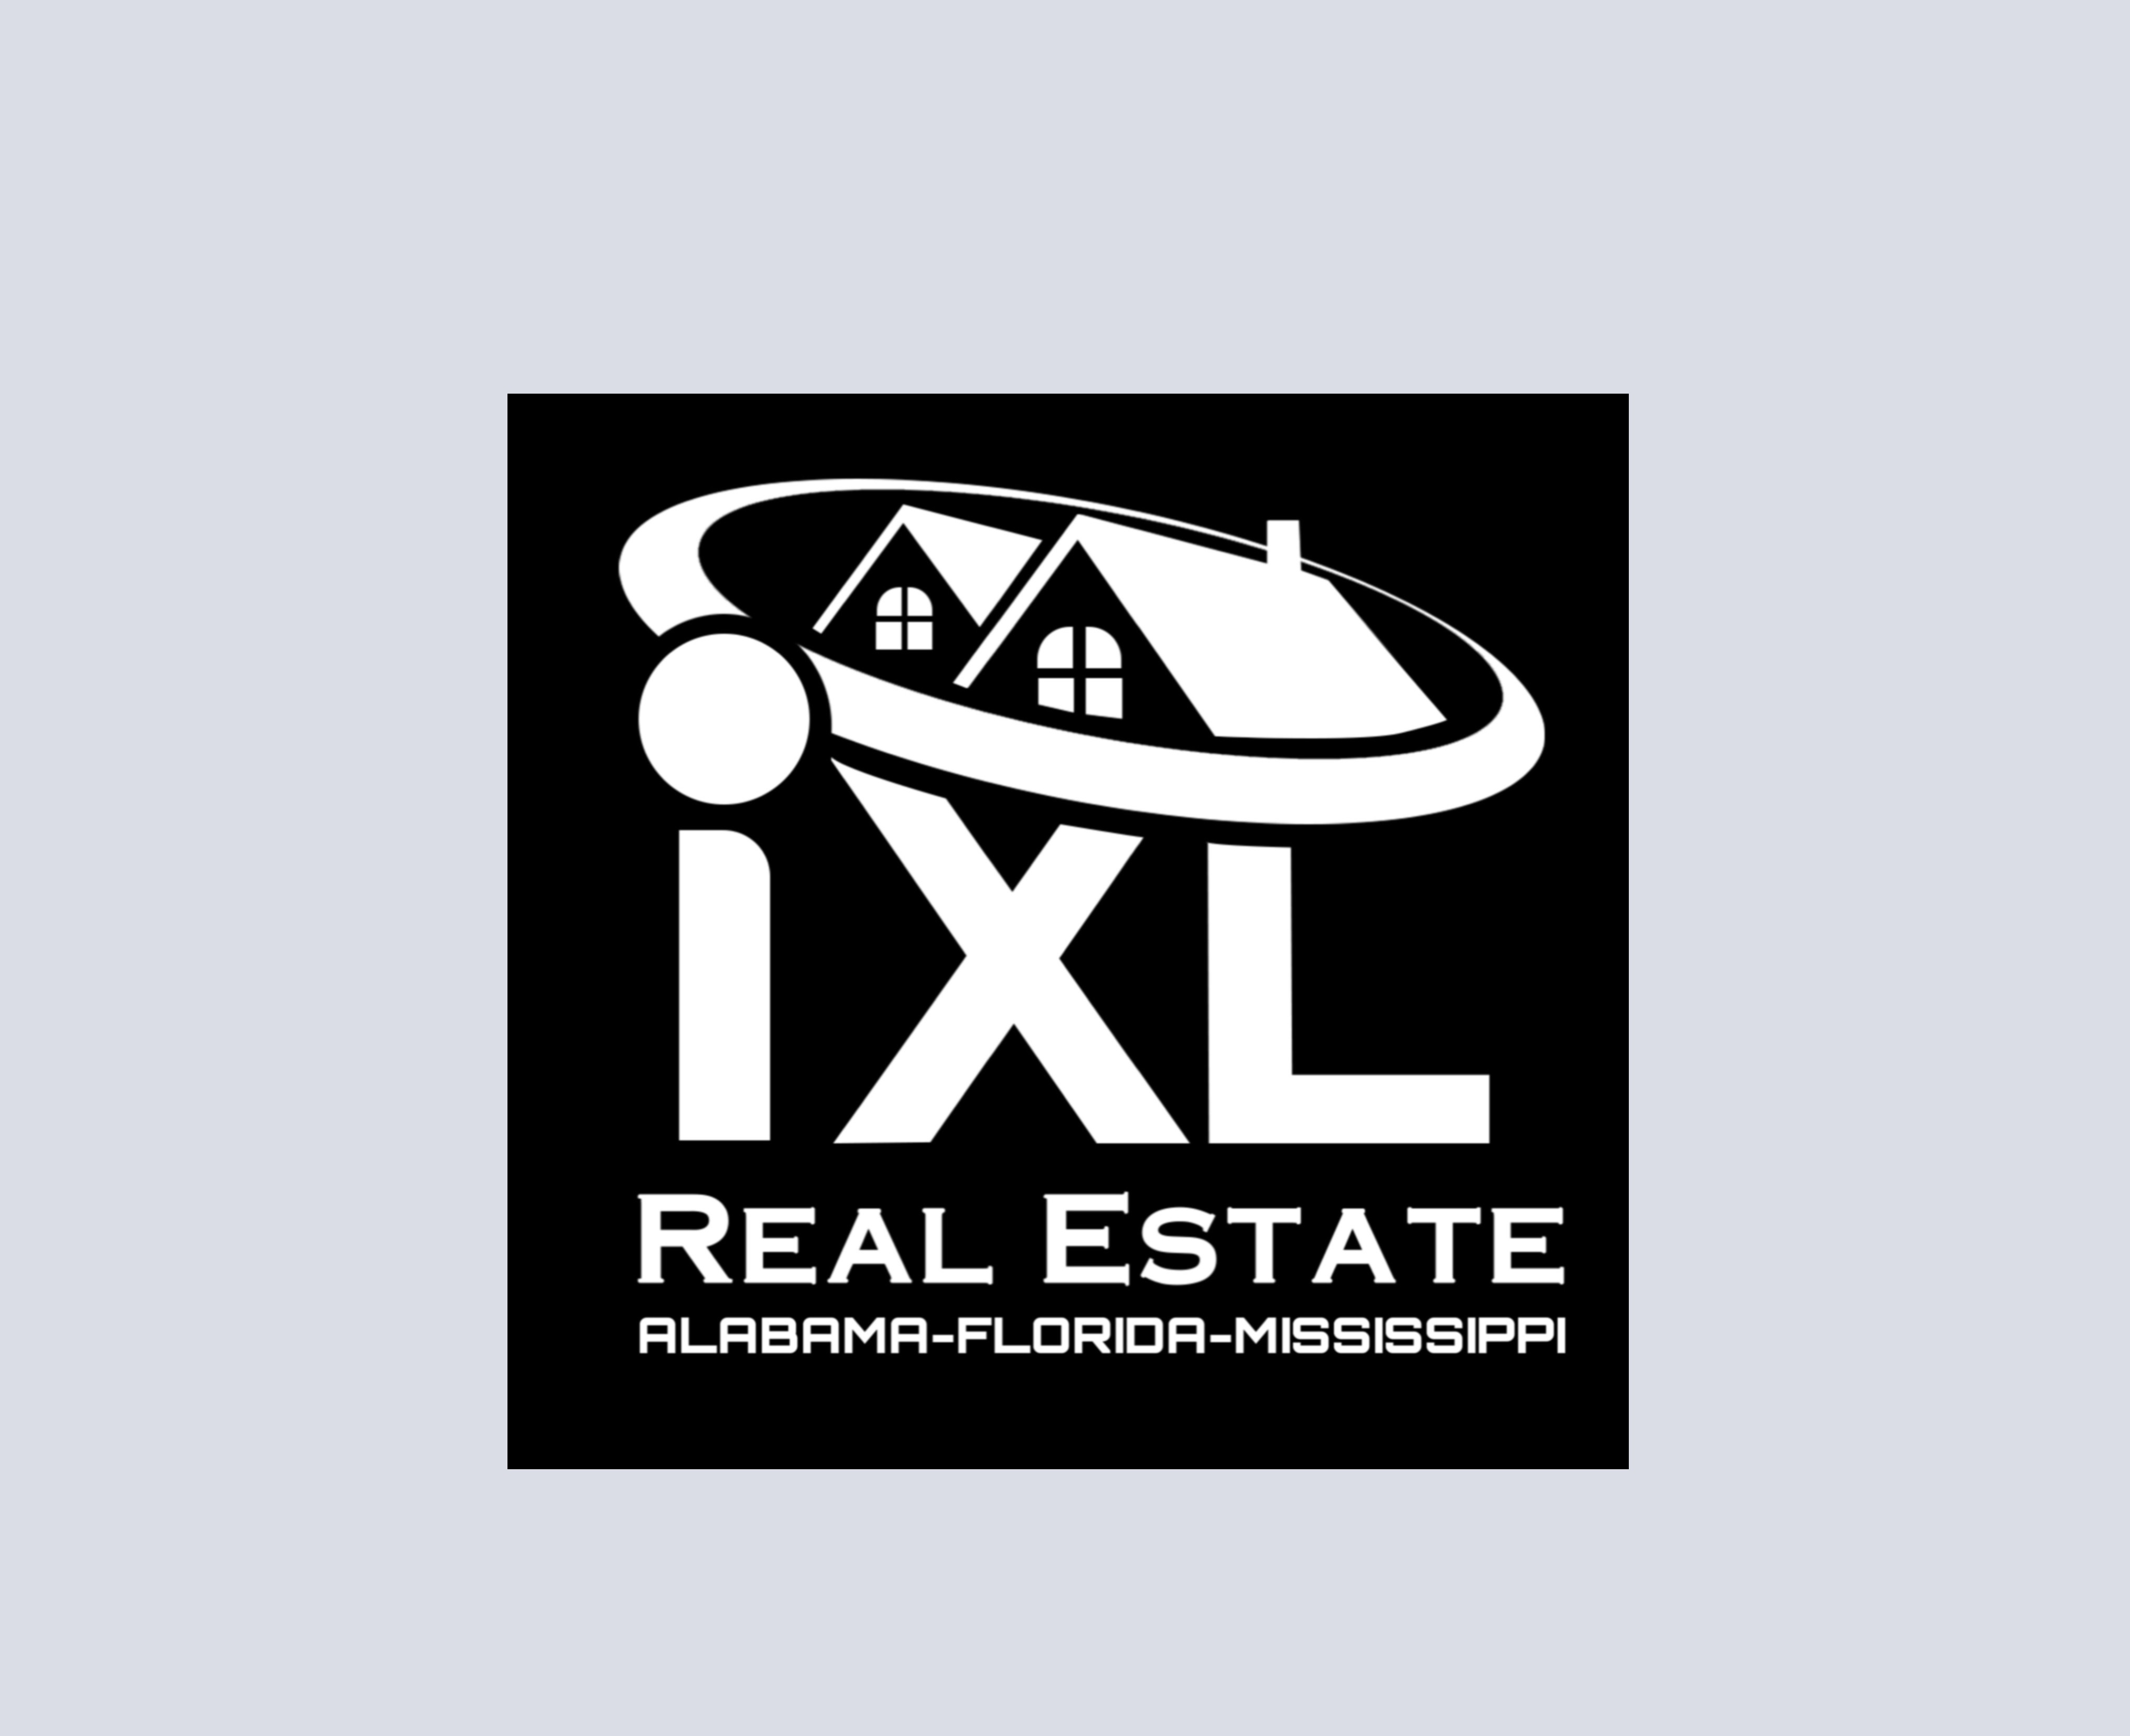 IXL Real Estate Ranks #3 in Mobile County, Expands Reach to Florida and Mississippi